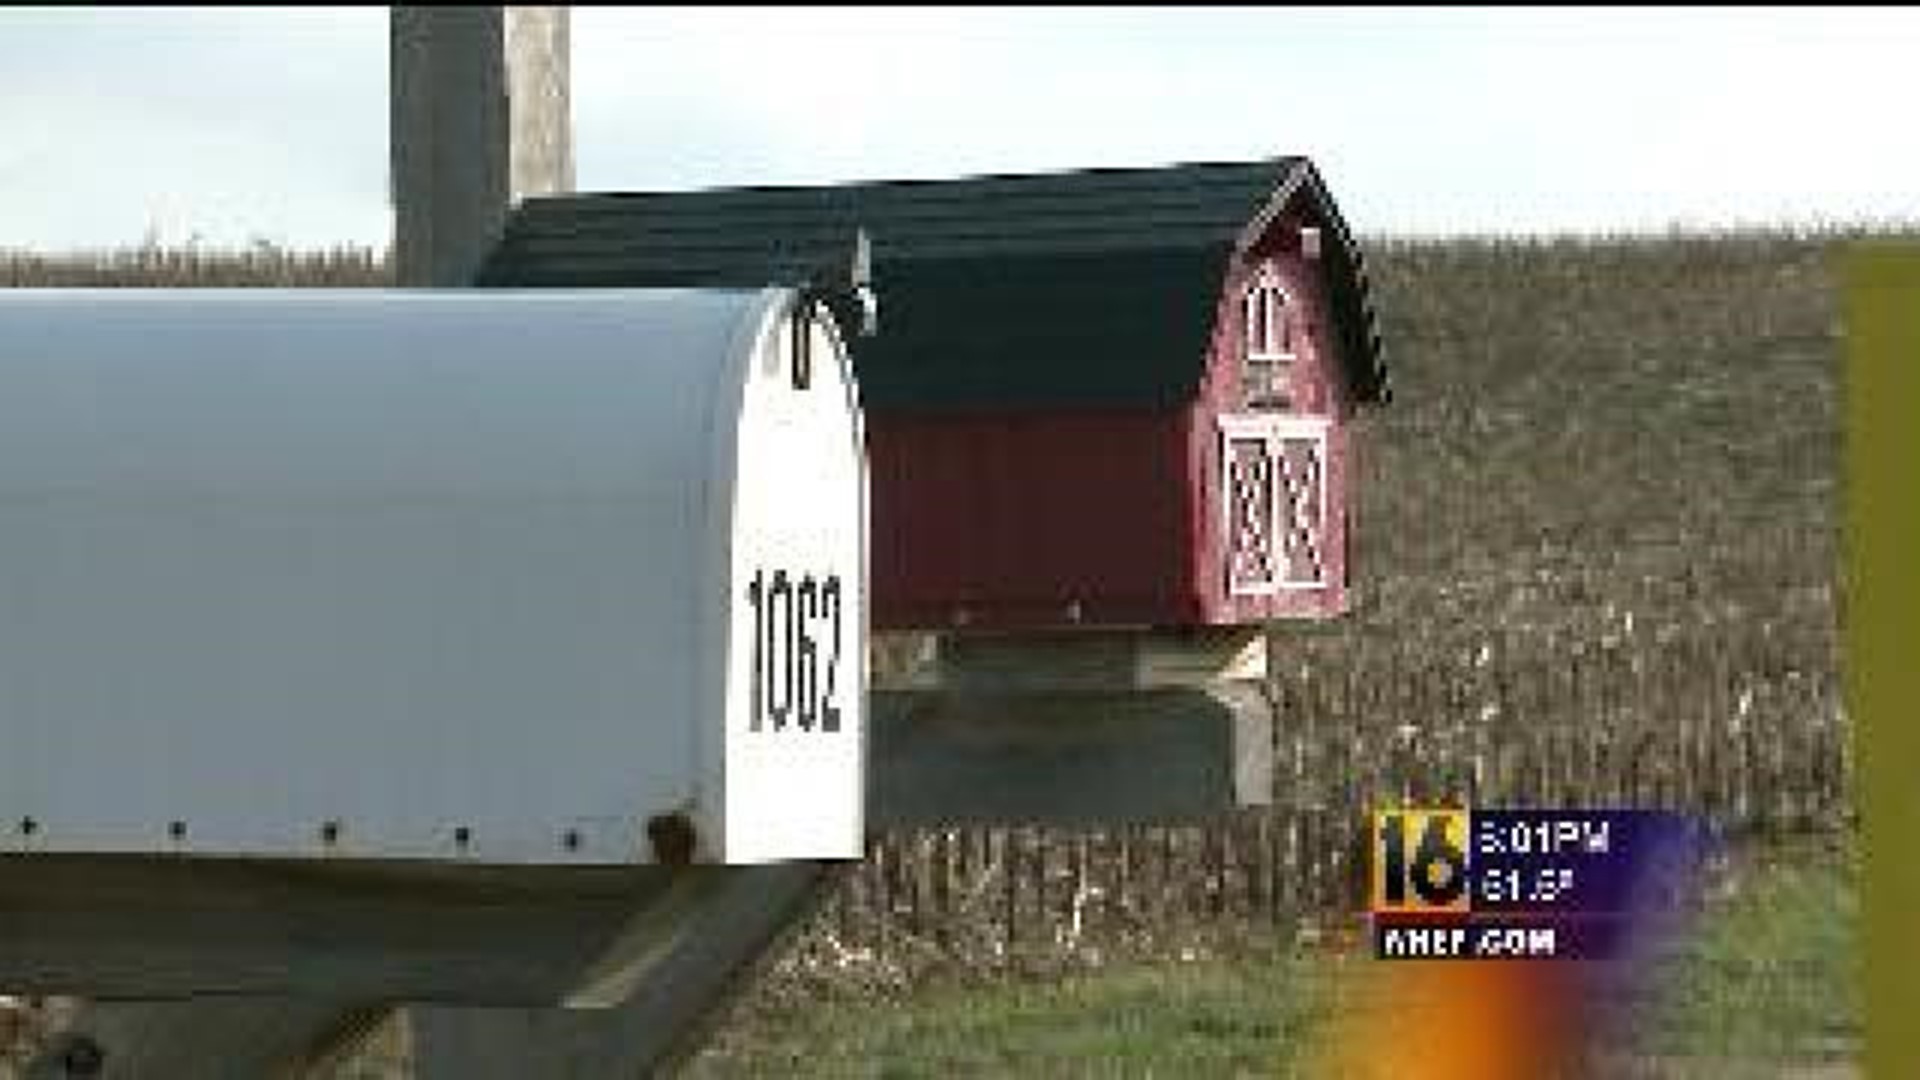 Neighbors say Mail is Missing